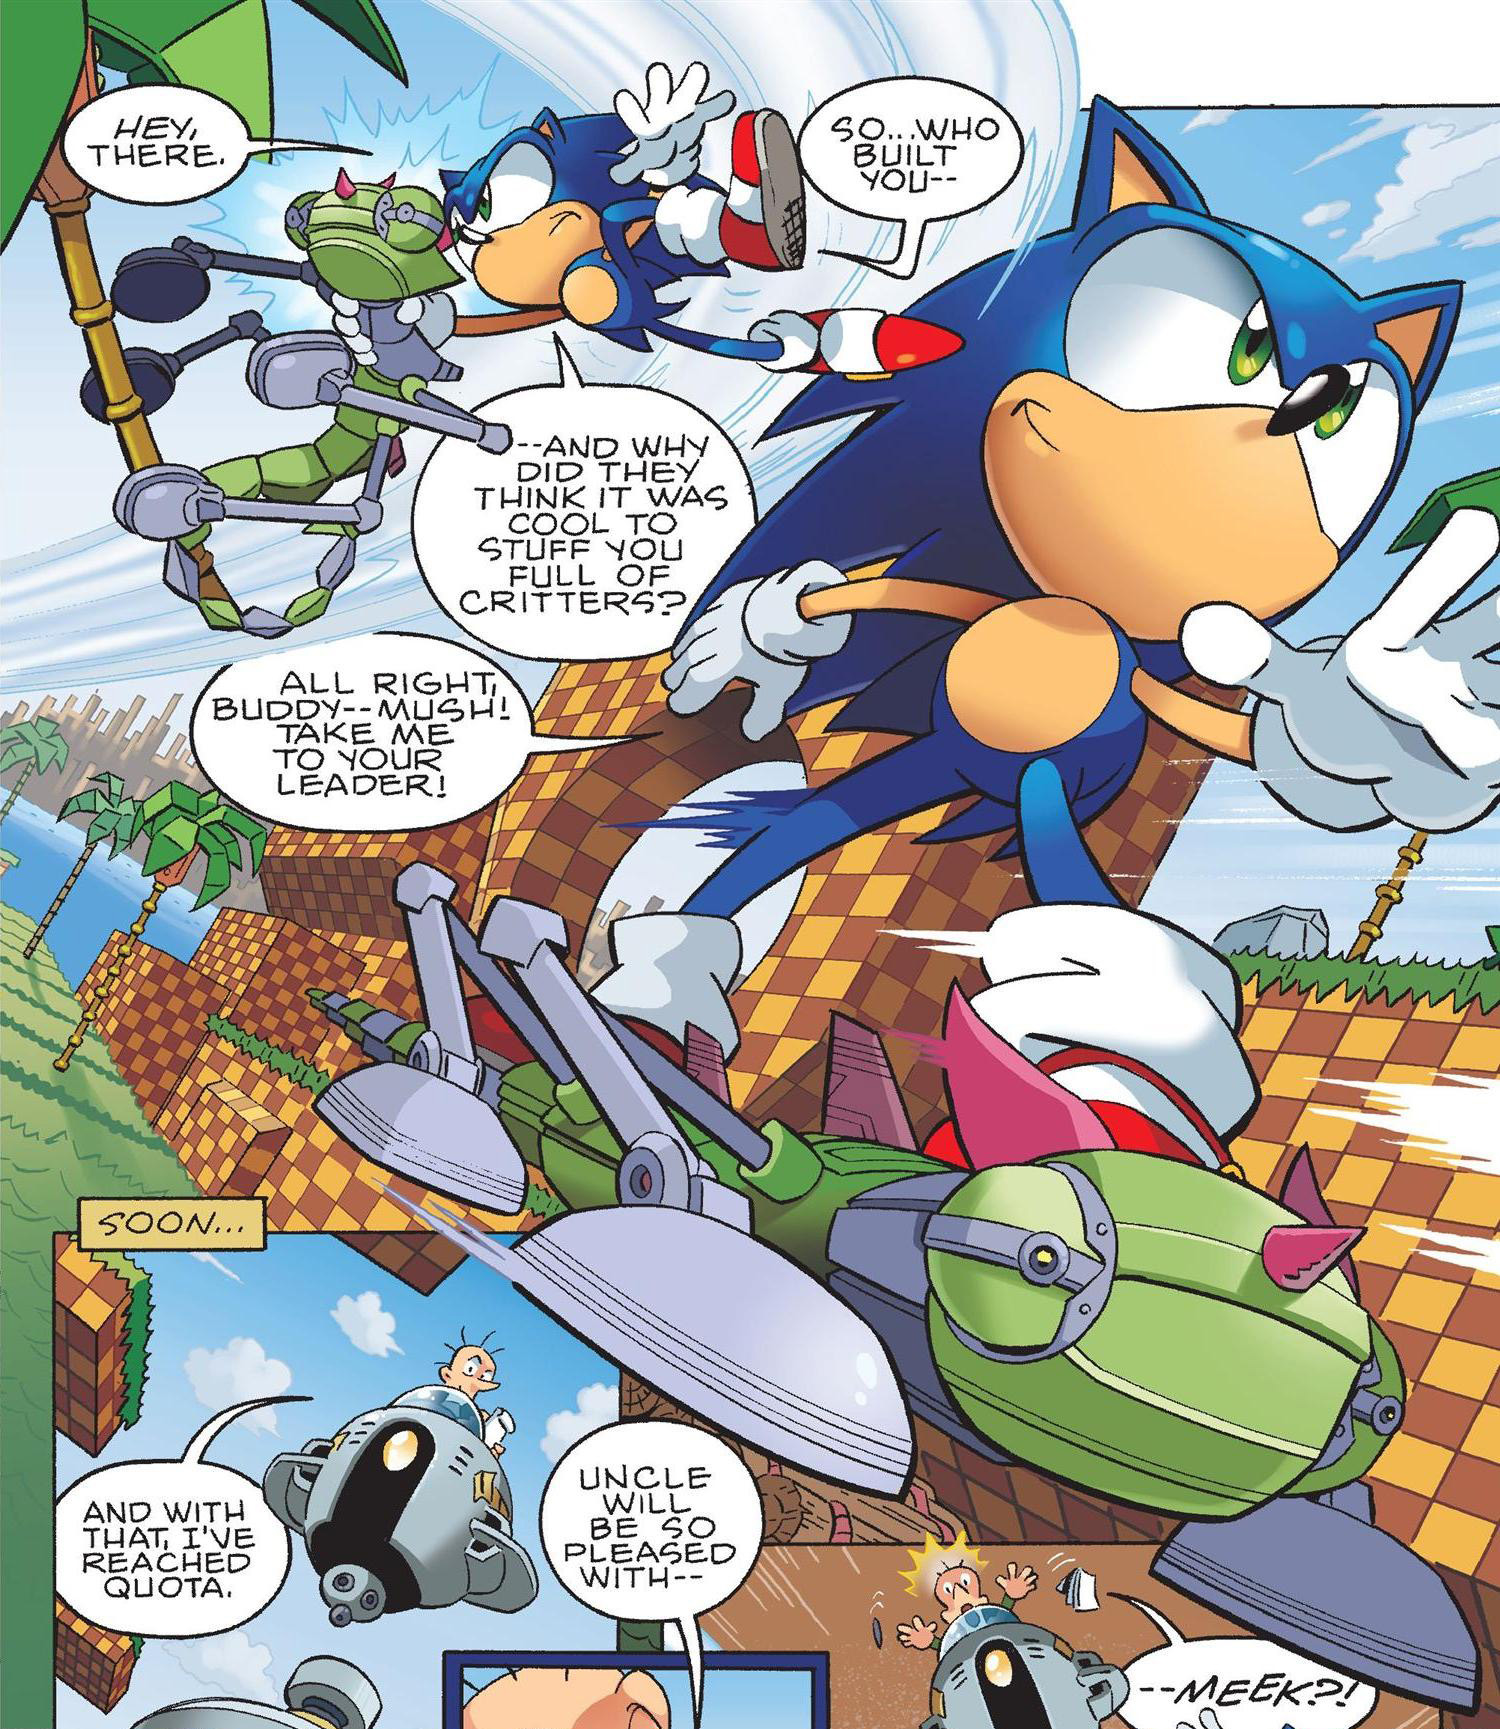 The Green Hill Zone: An Iconic Part Of The Sonic The Hedgehog Franchise